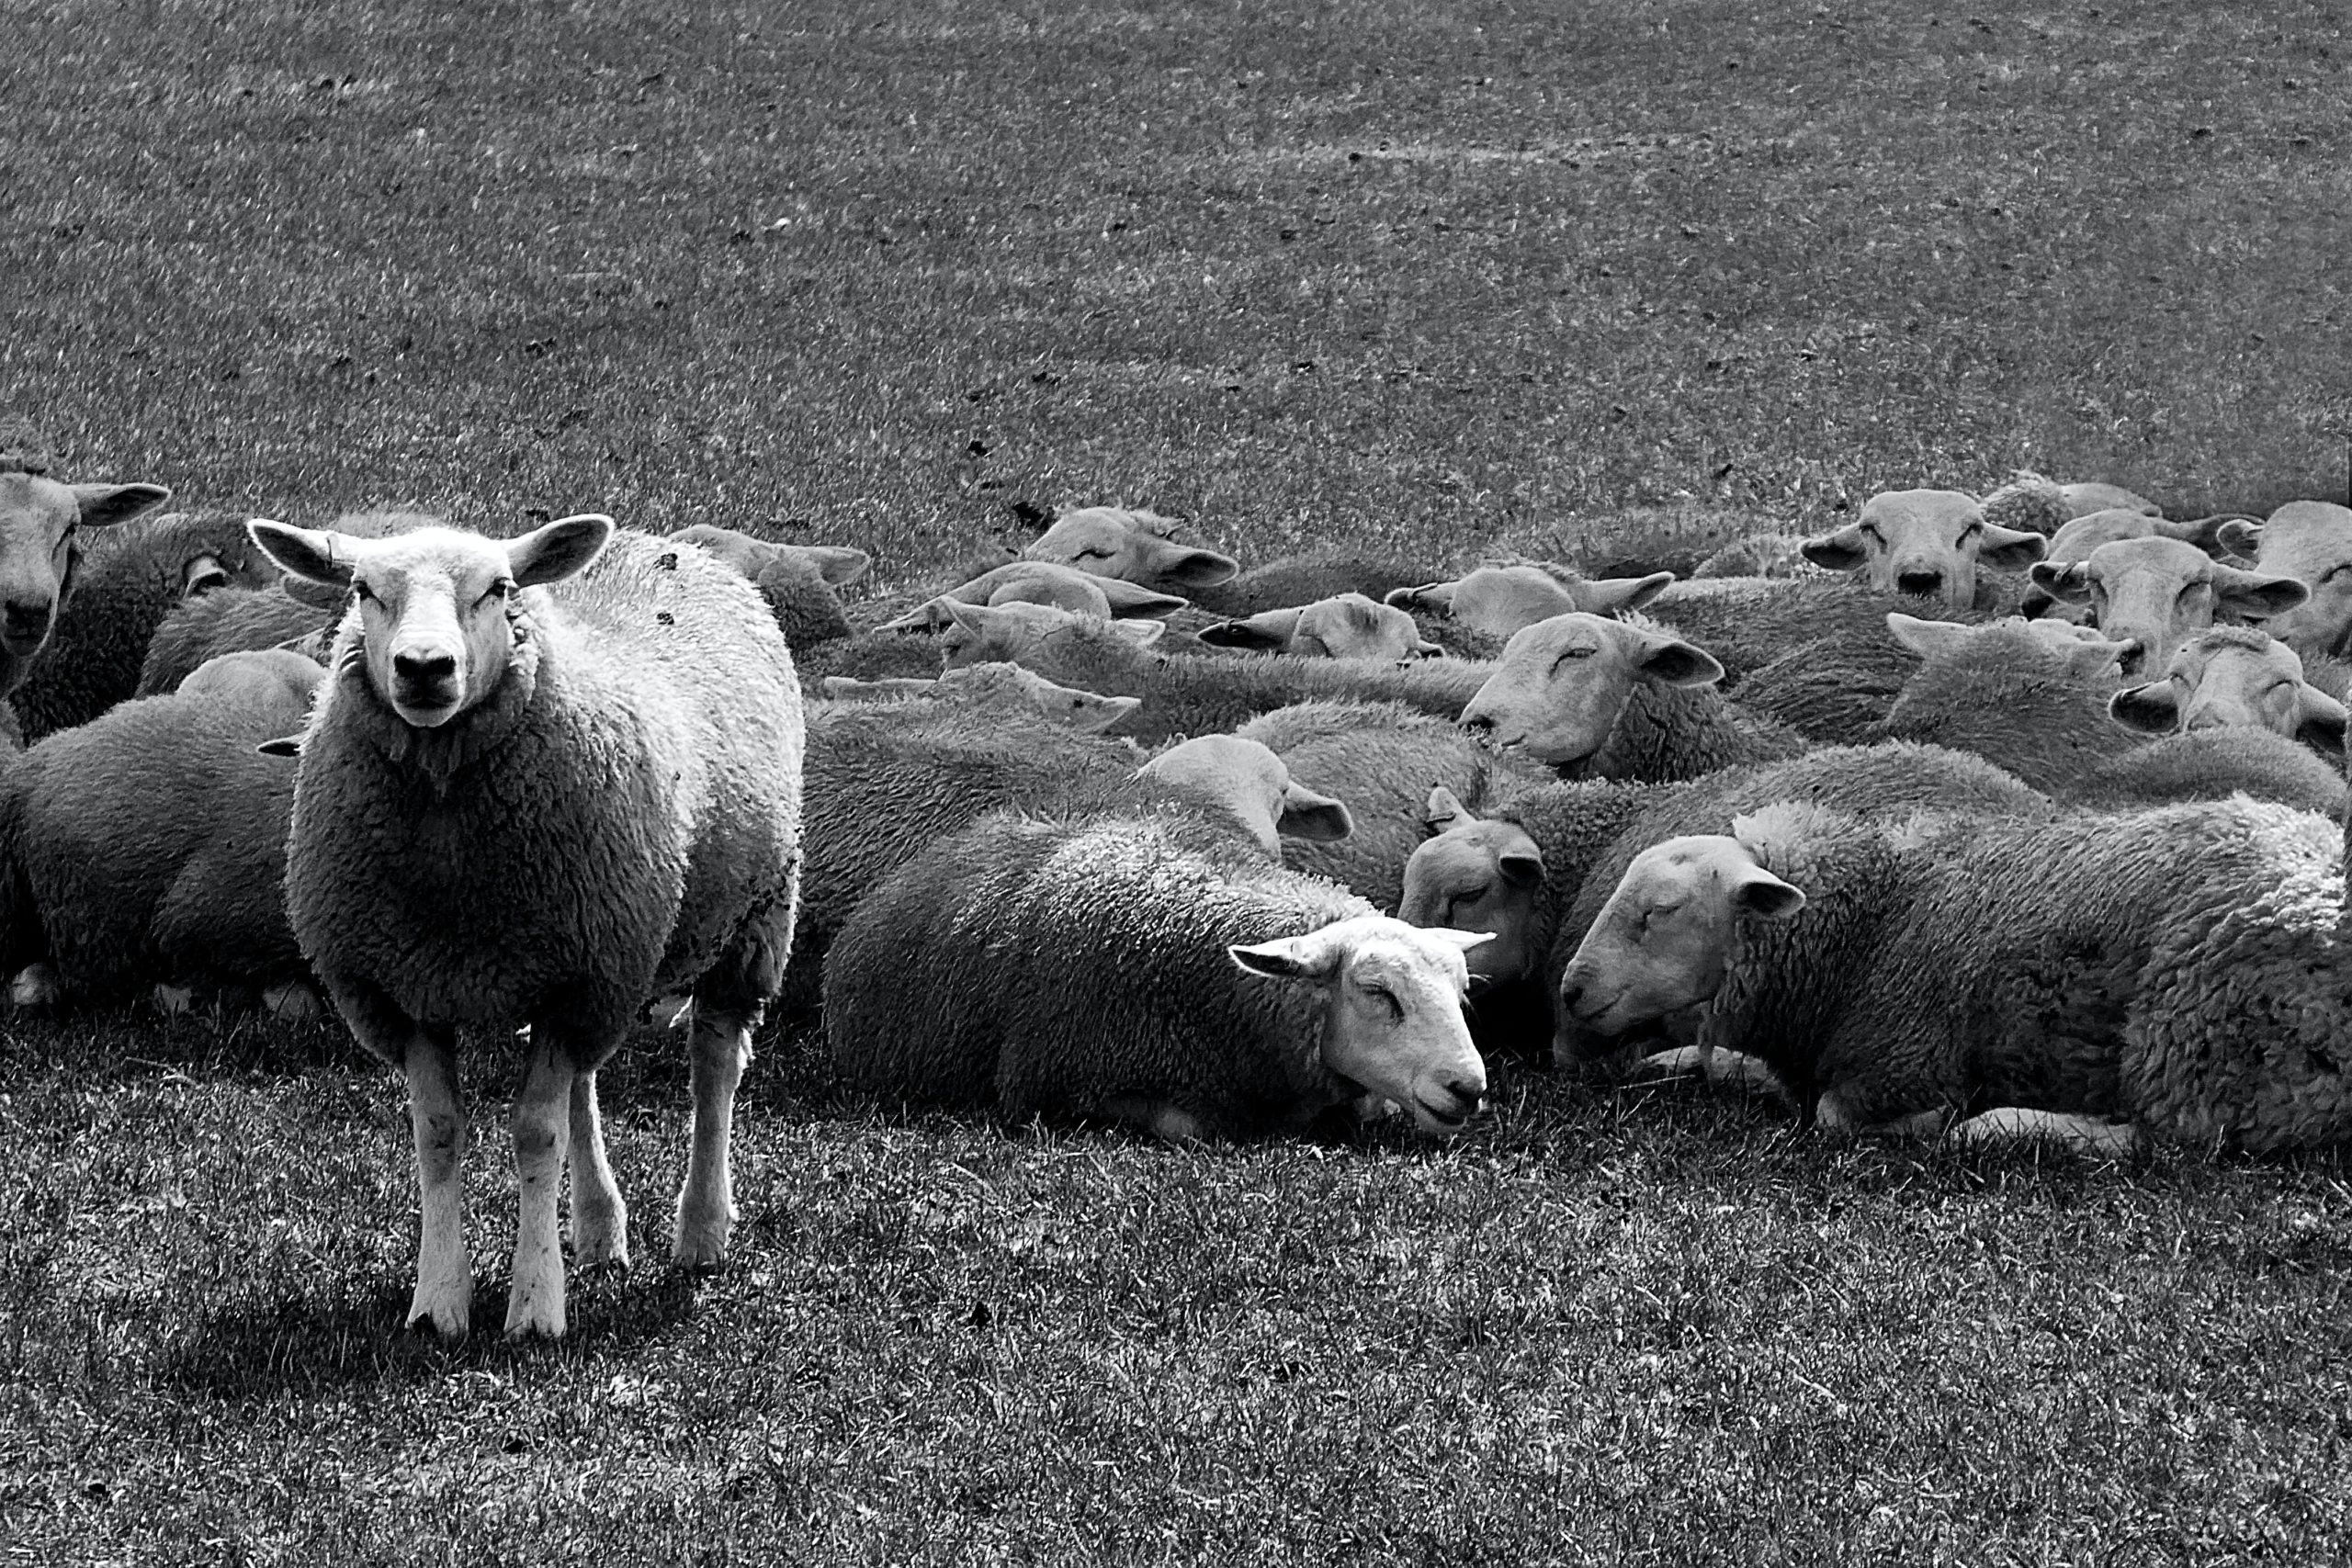 One sheep standing up differntly than the others